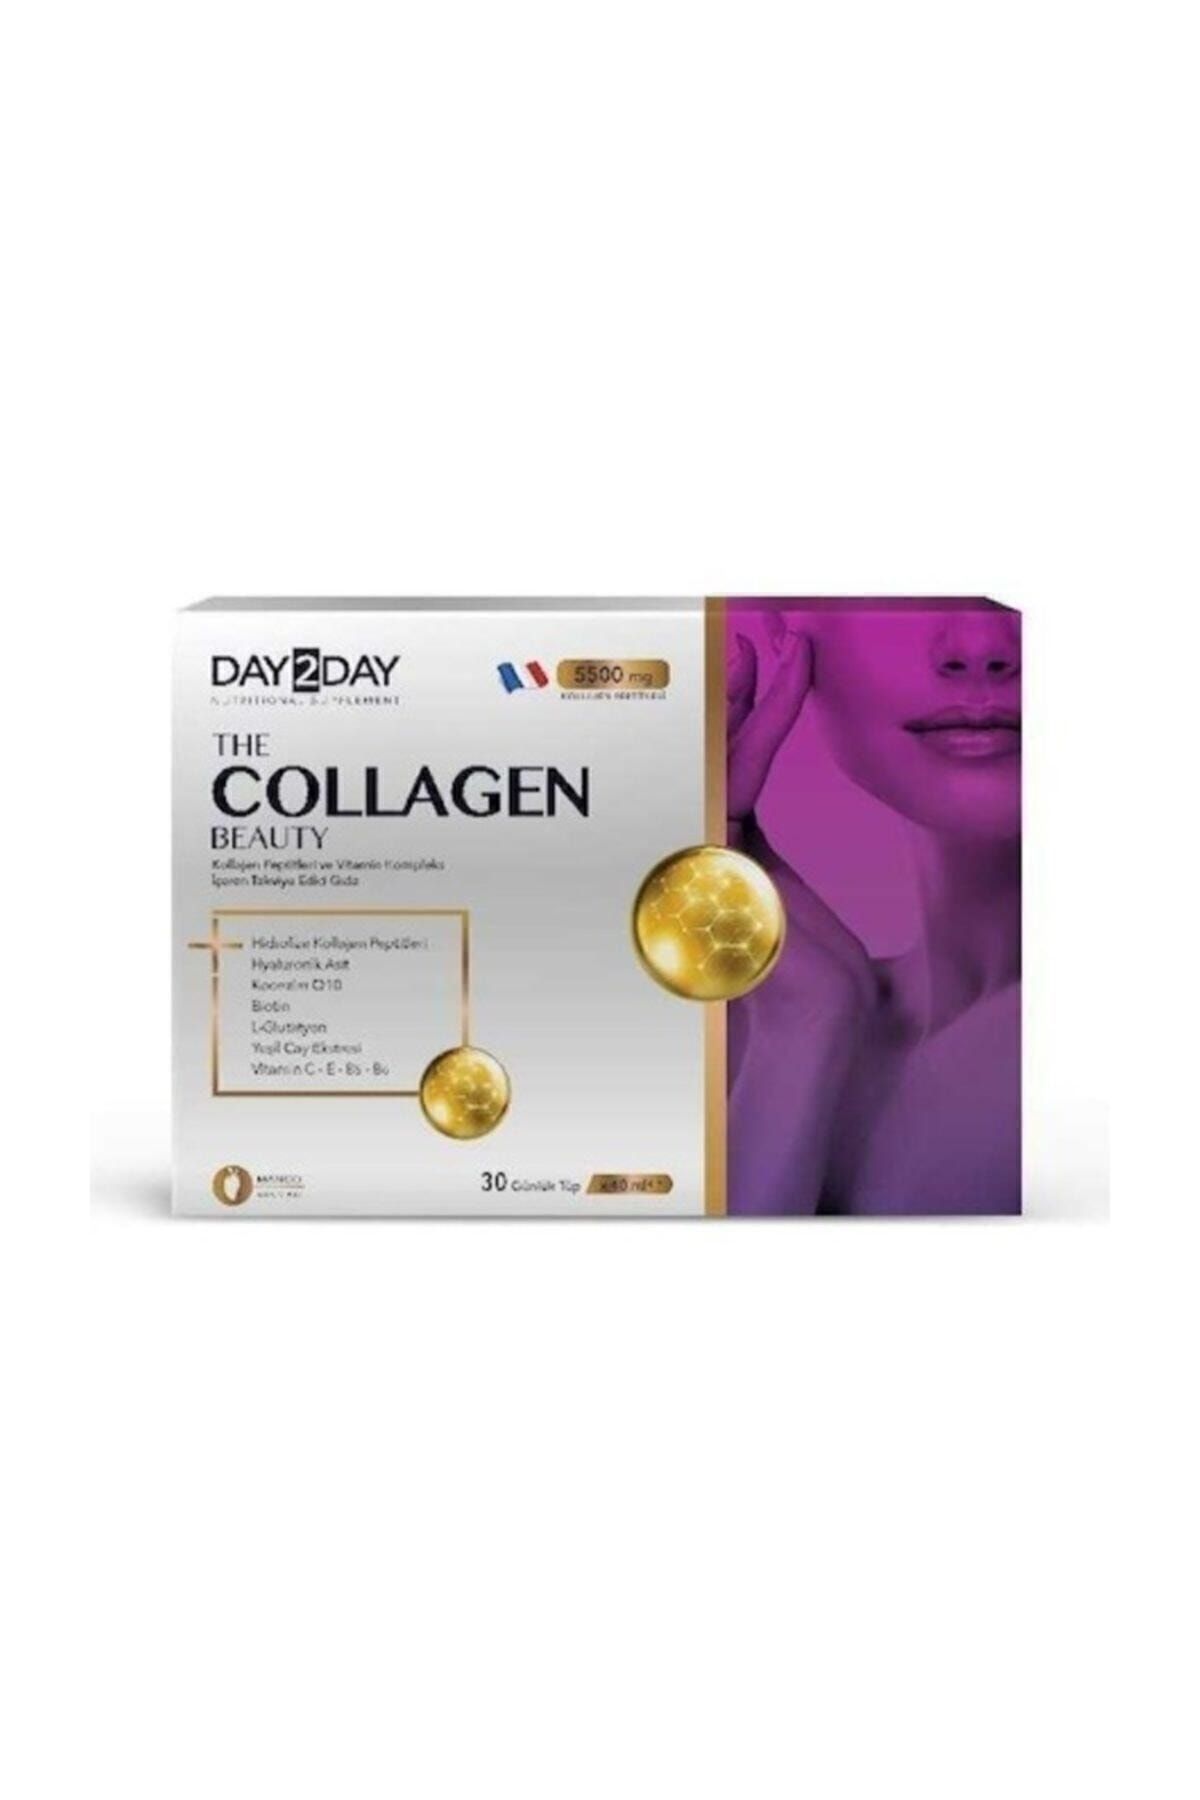 Ocean Day 2 Day The Collagen Beauty 30 Tup